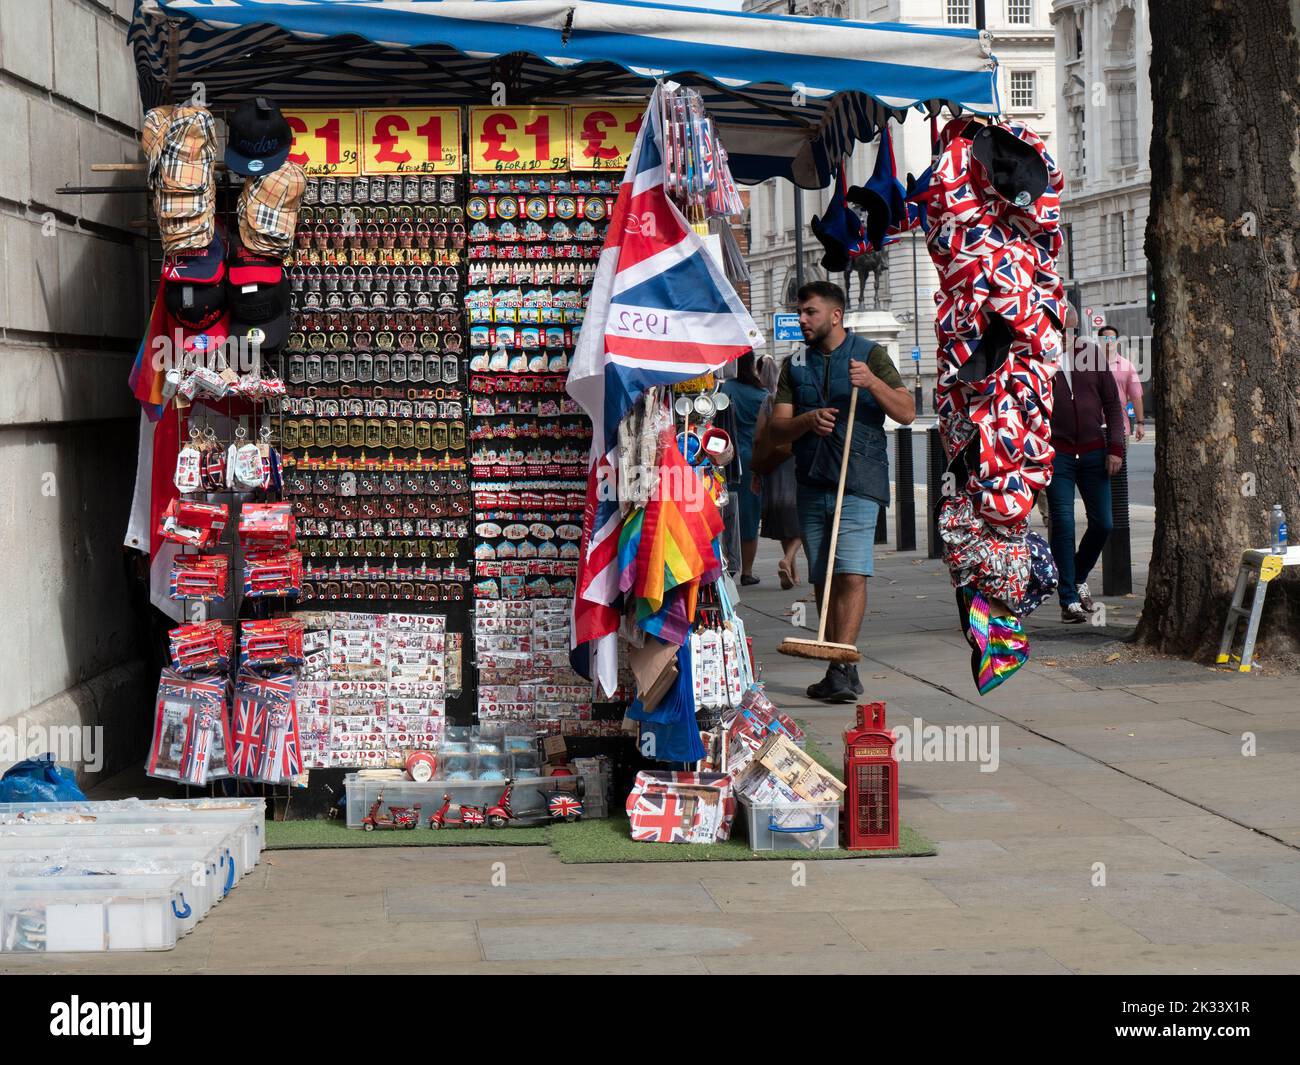 Souvenir stall in Whitehall London, with pound sterling signs and London tourist goods for sale Stock Photo